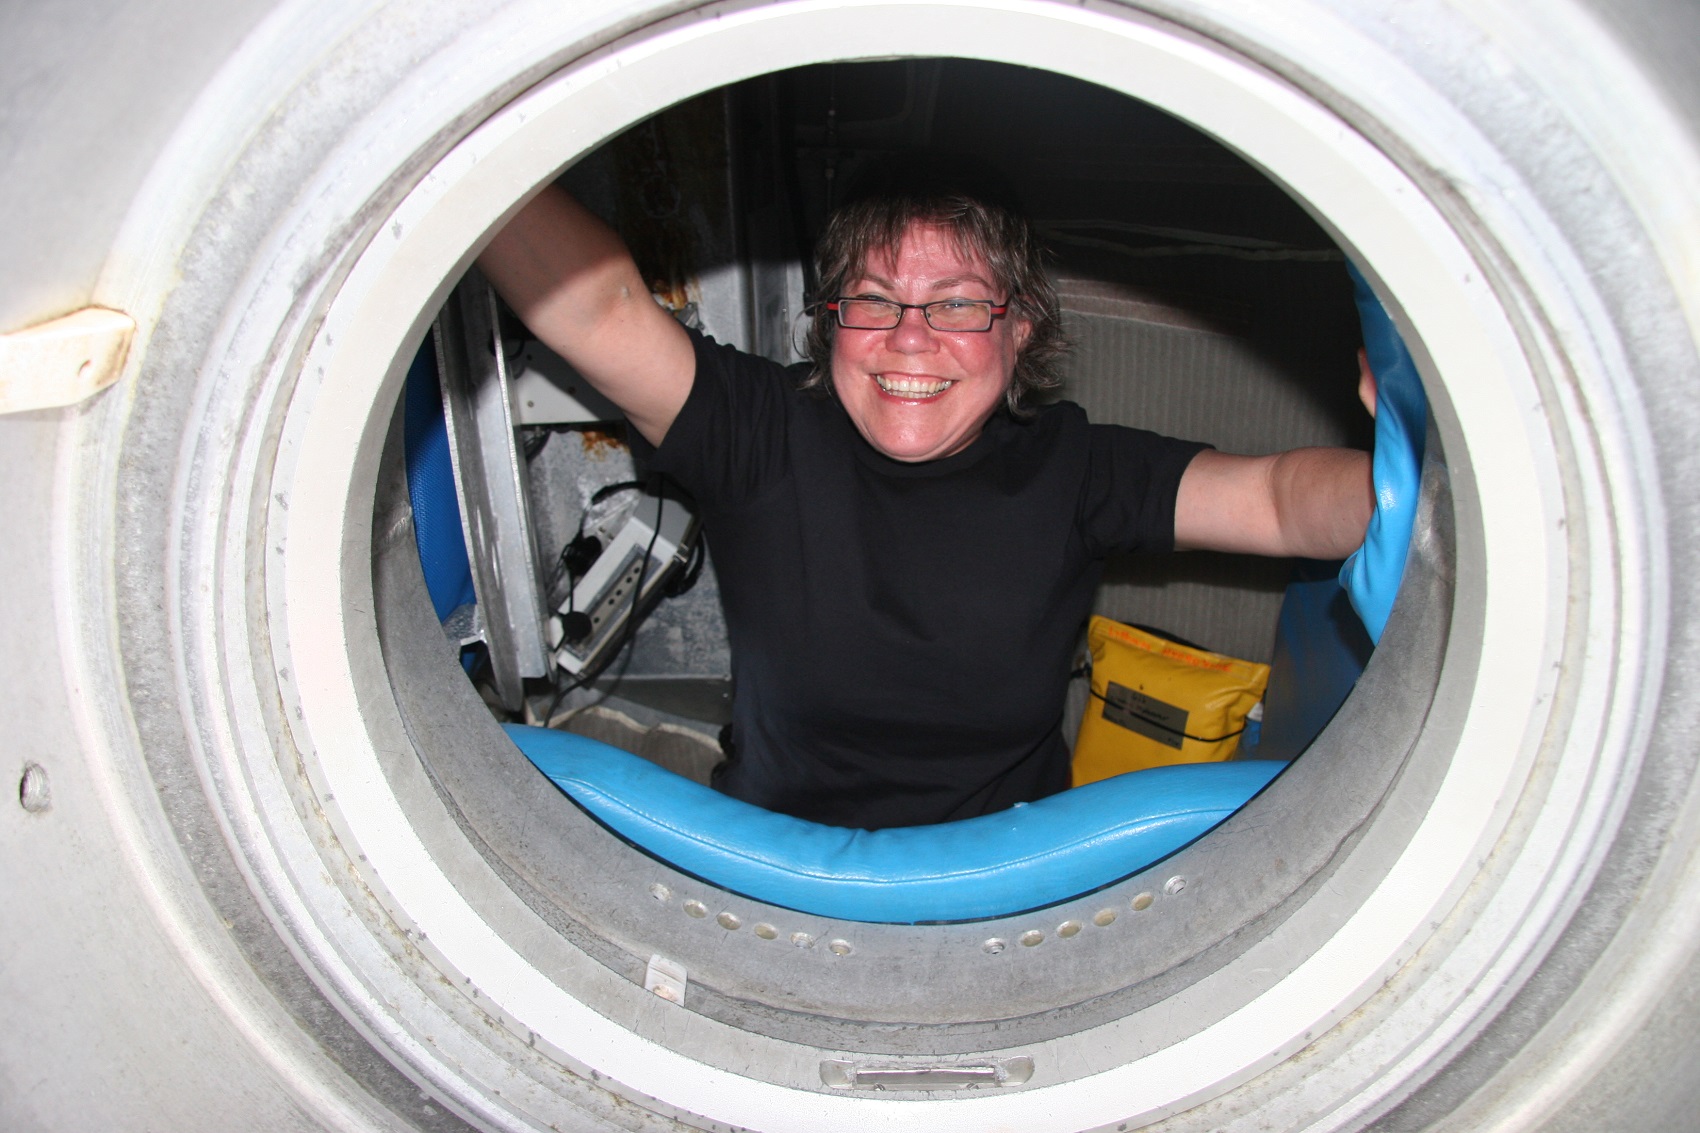  Mitchell is all smiles in the submersible that took her to the bottom of the sea.